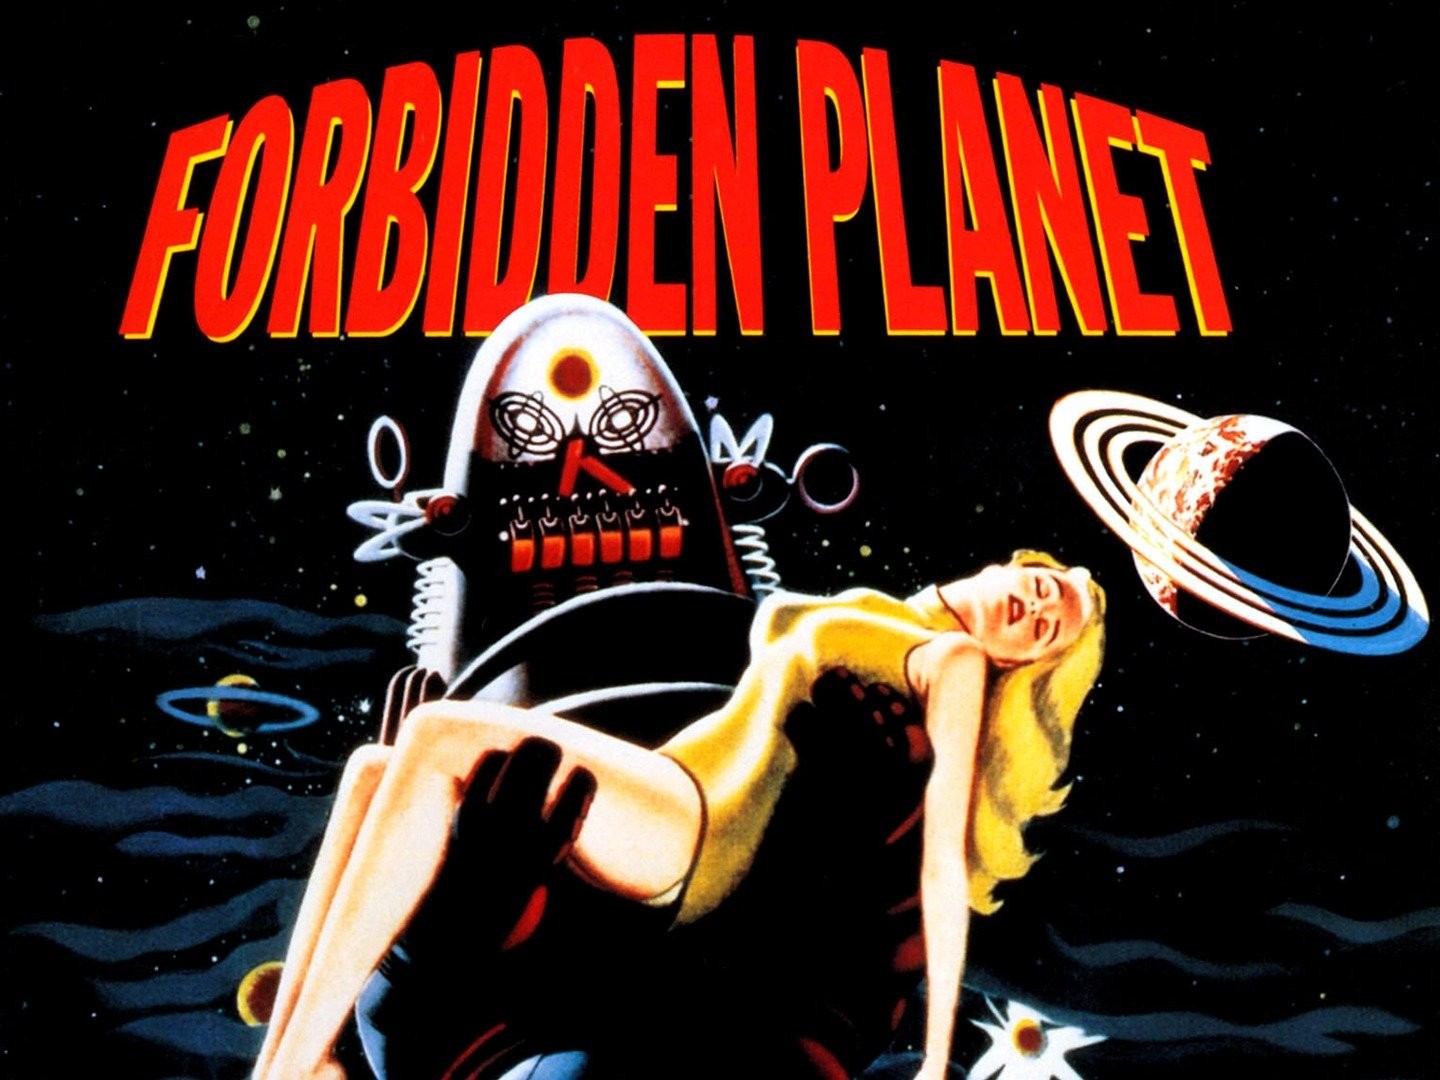 Forbidden Planet - Rotten Tomatoes